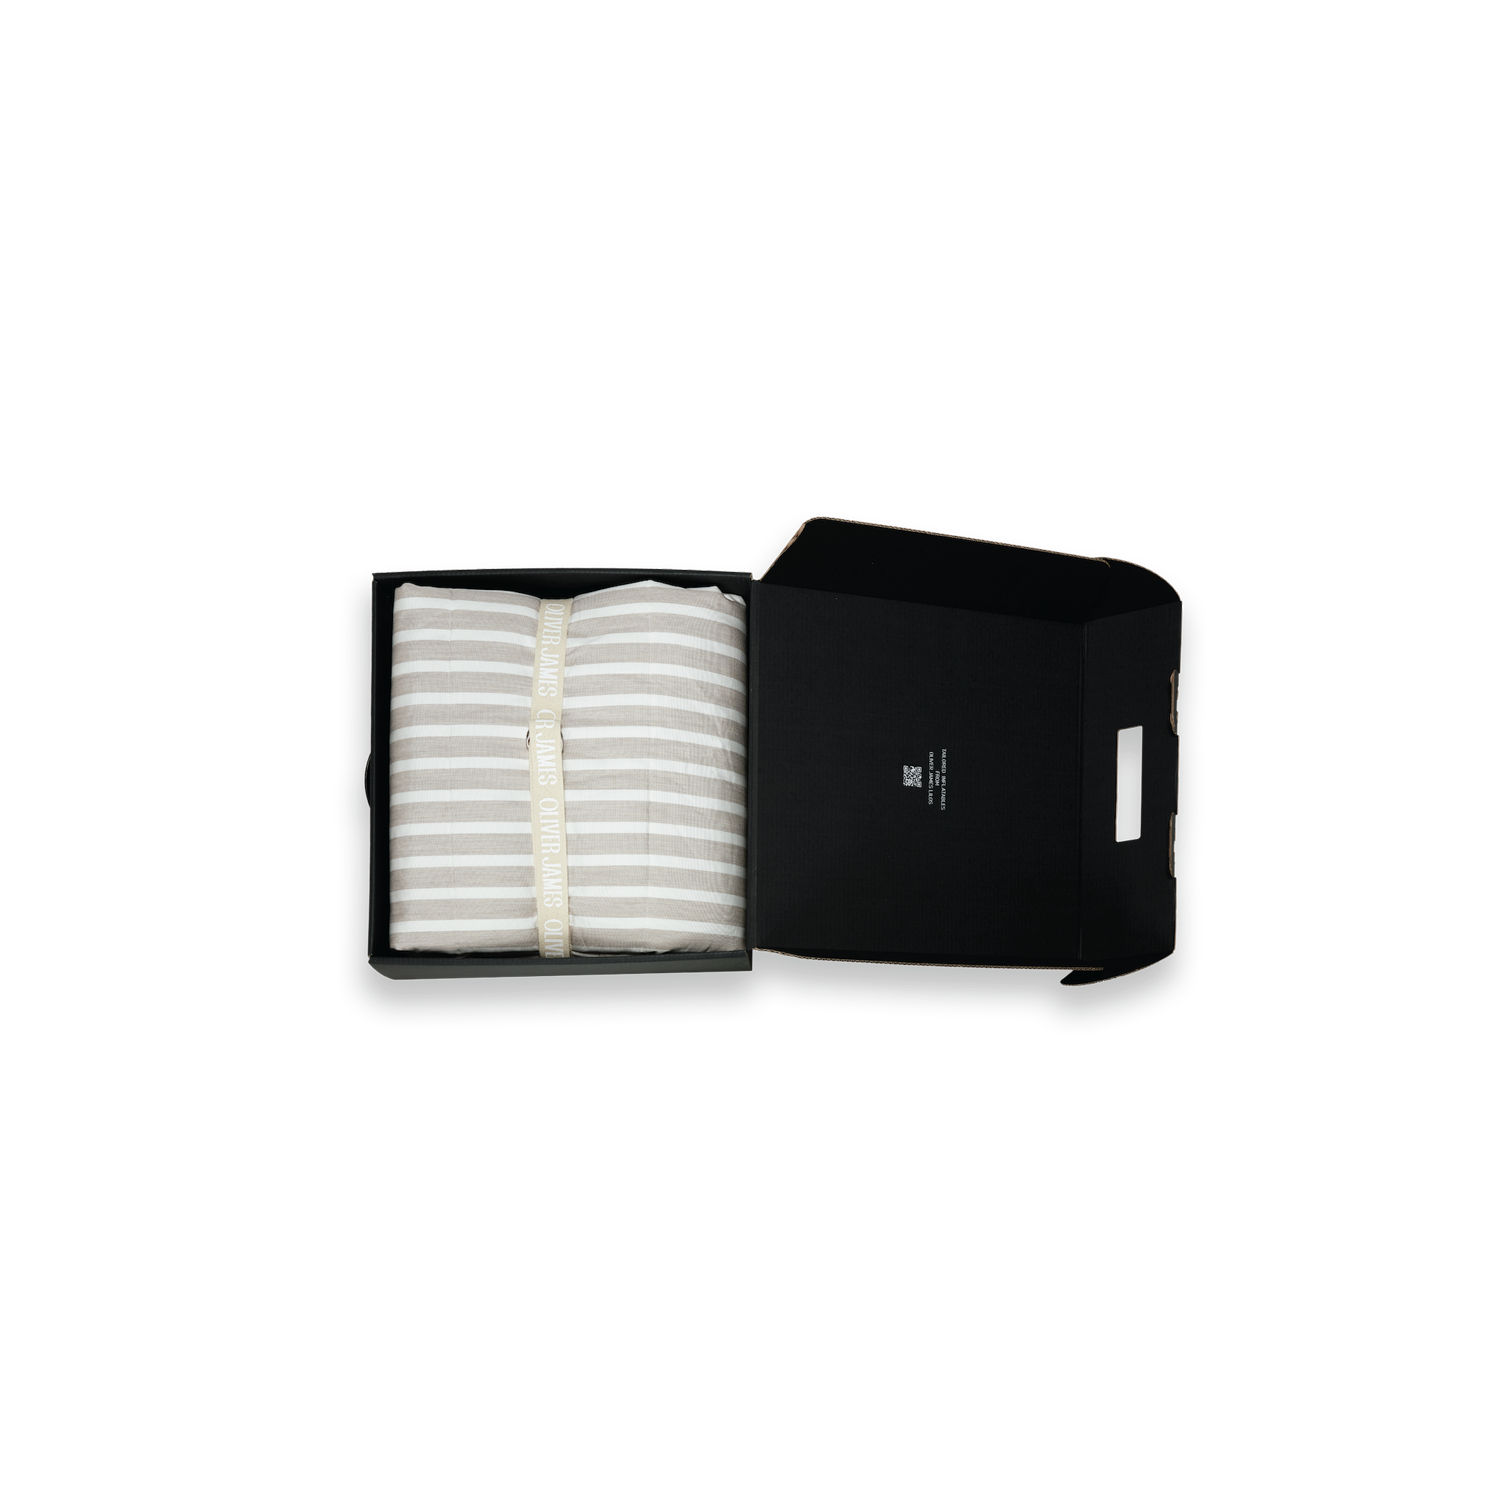 A double white and beige stripe inflatable luxury pool float lounger cover folded in black box box with a belt, card and pump.